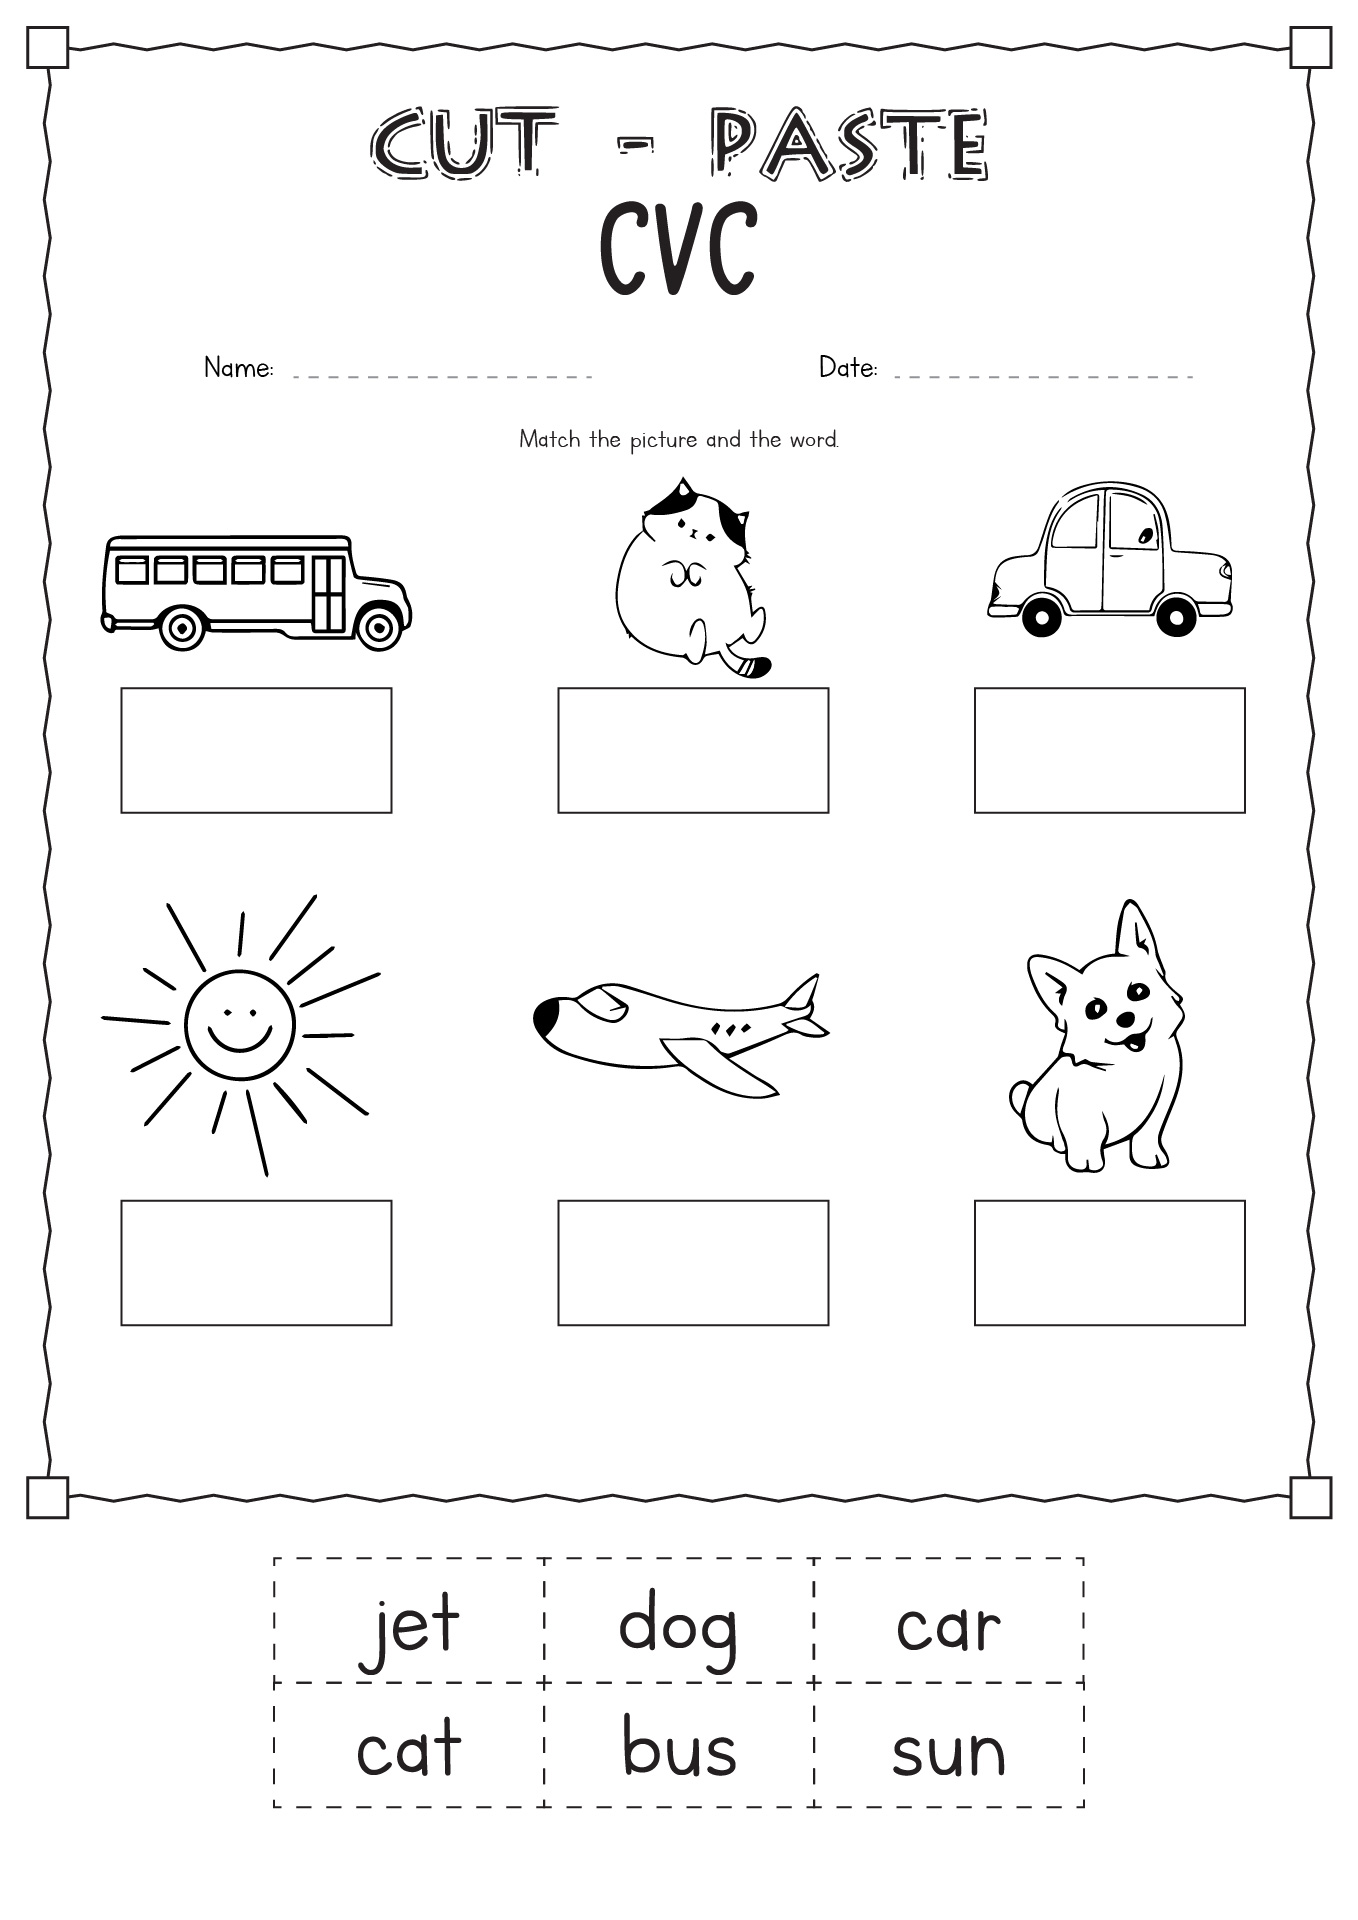 Cut and Paste CVC Worksheets Image